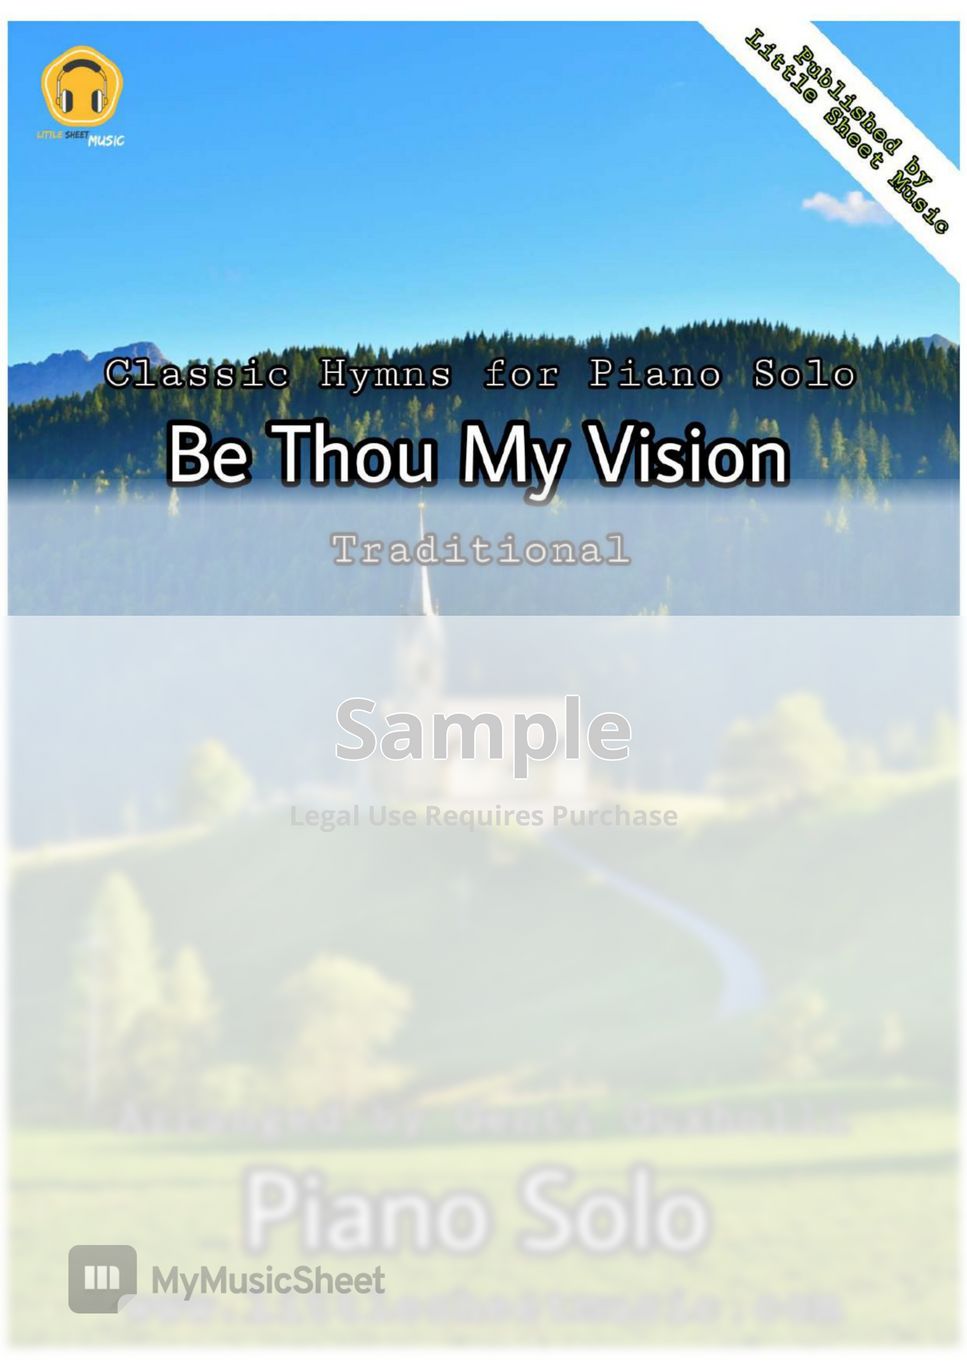 Traditional - Be Thou My Vision by Genti Guxholli